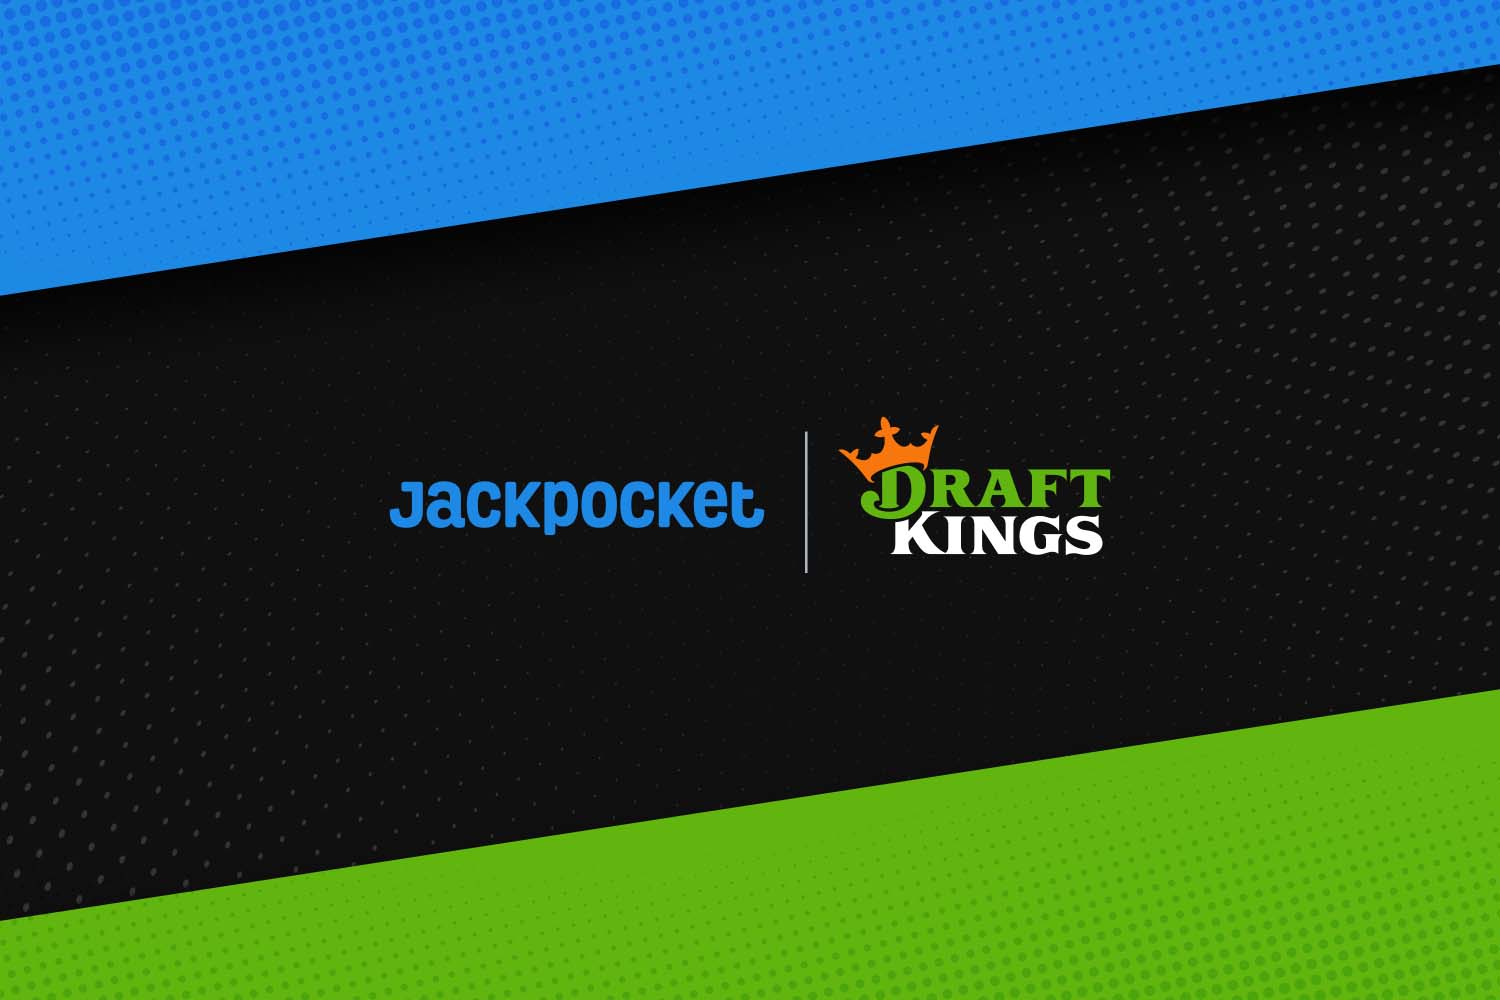 Jackpocket Joins the DraftKings Family